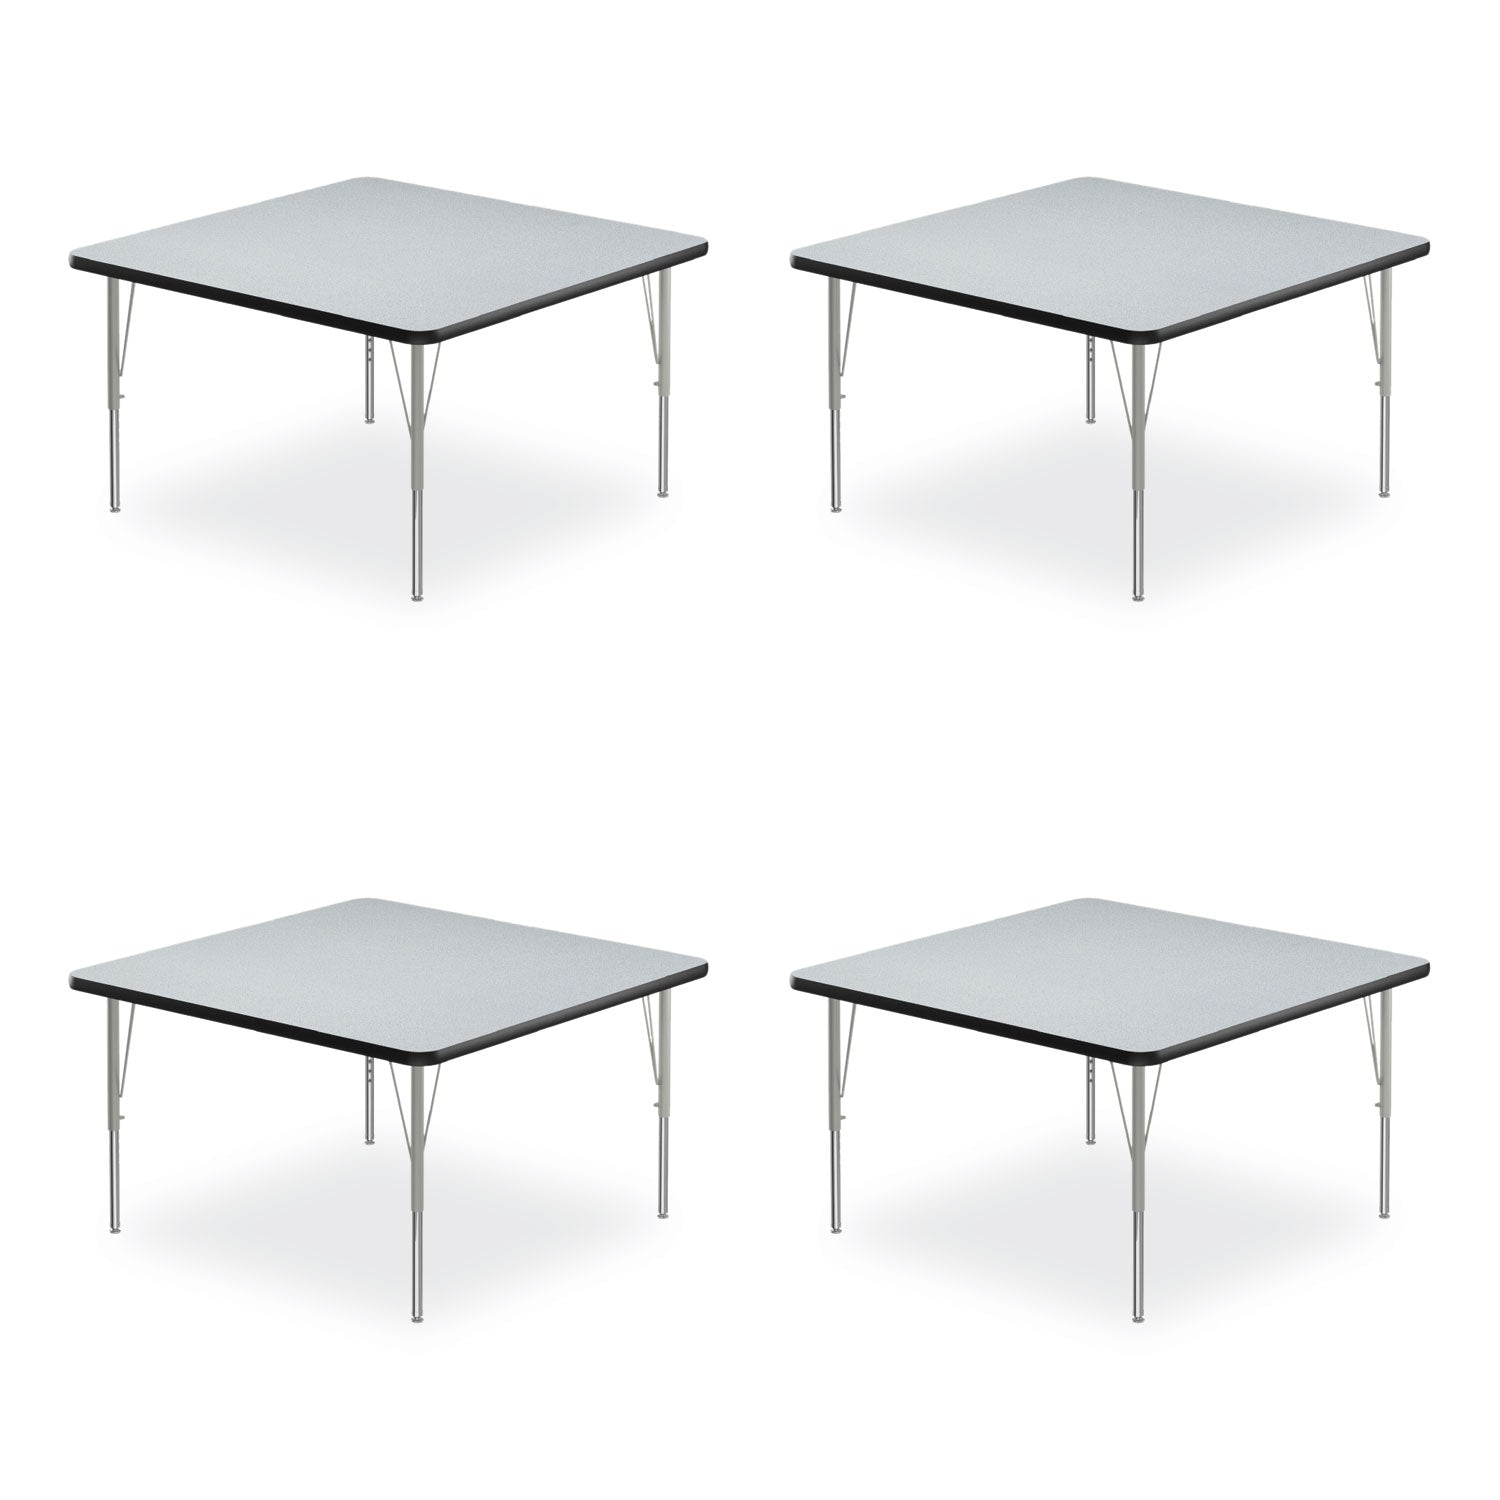 adjustable-activity-tables-square-48-x-48-x-19-to-29-gray-top-silver-legs-4-pallet-ships-in-4-6-business-days_crl4848tf15954p - 1